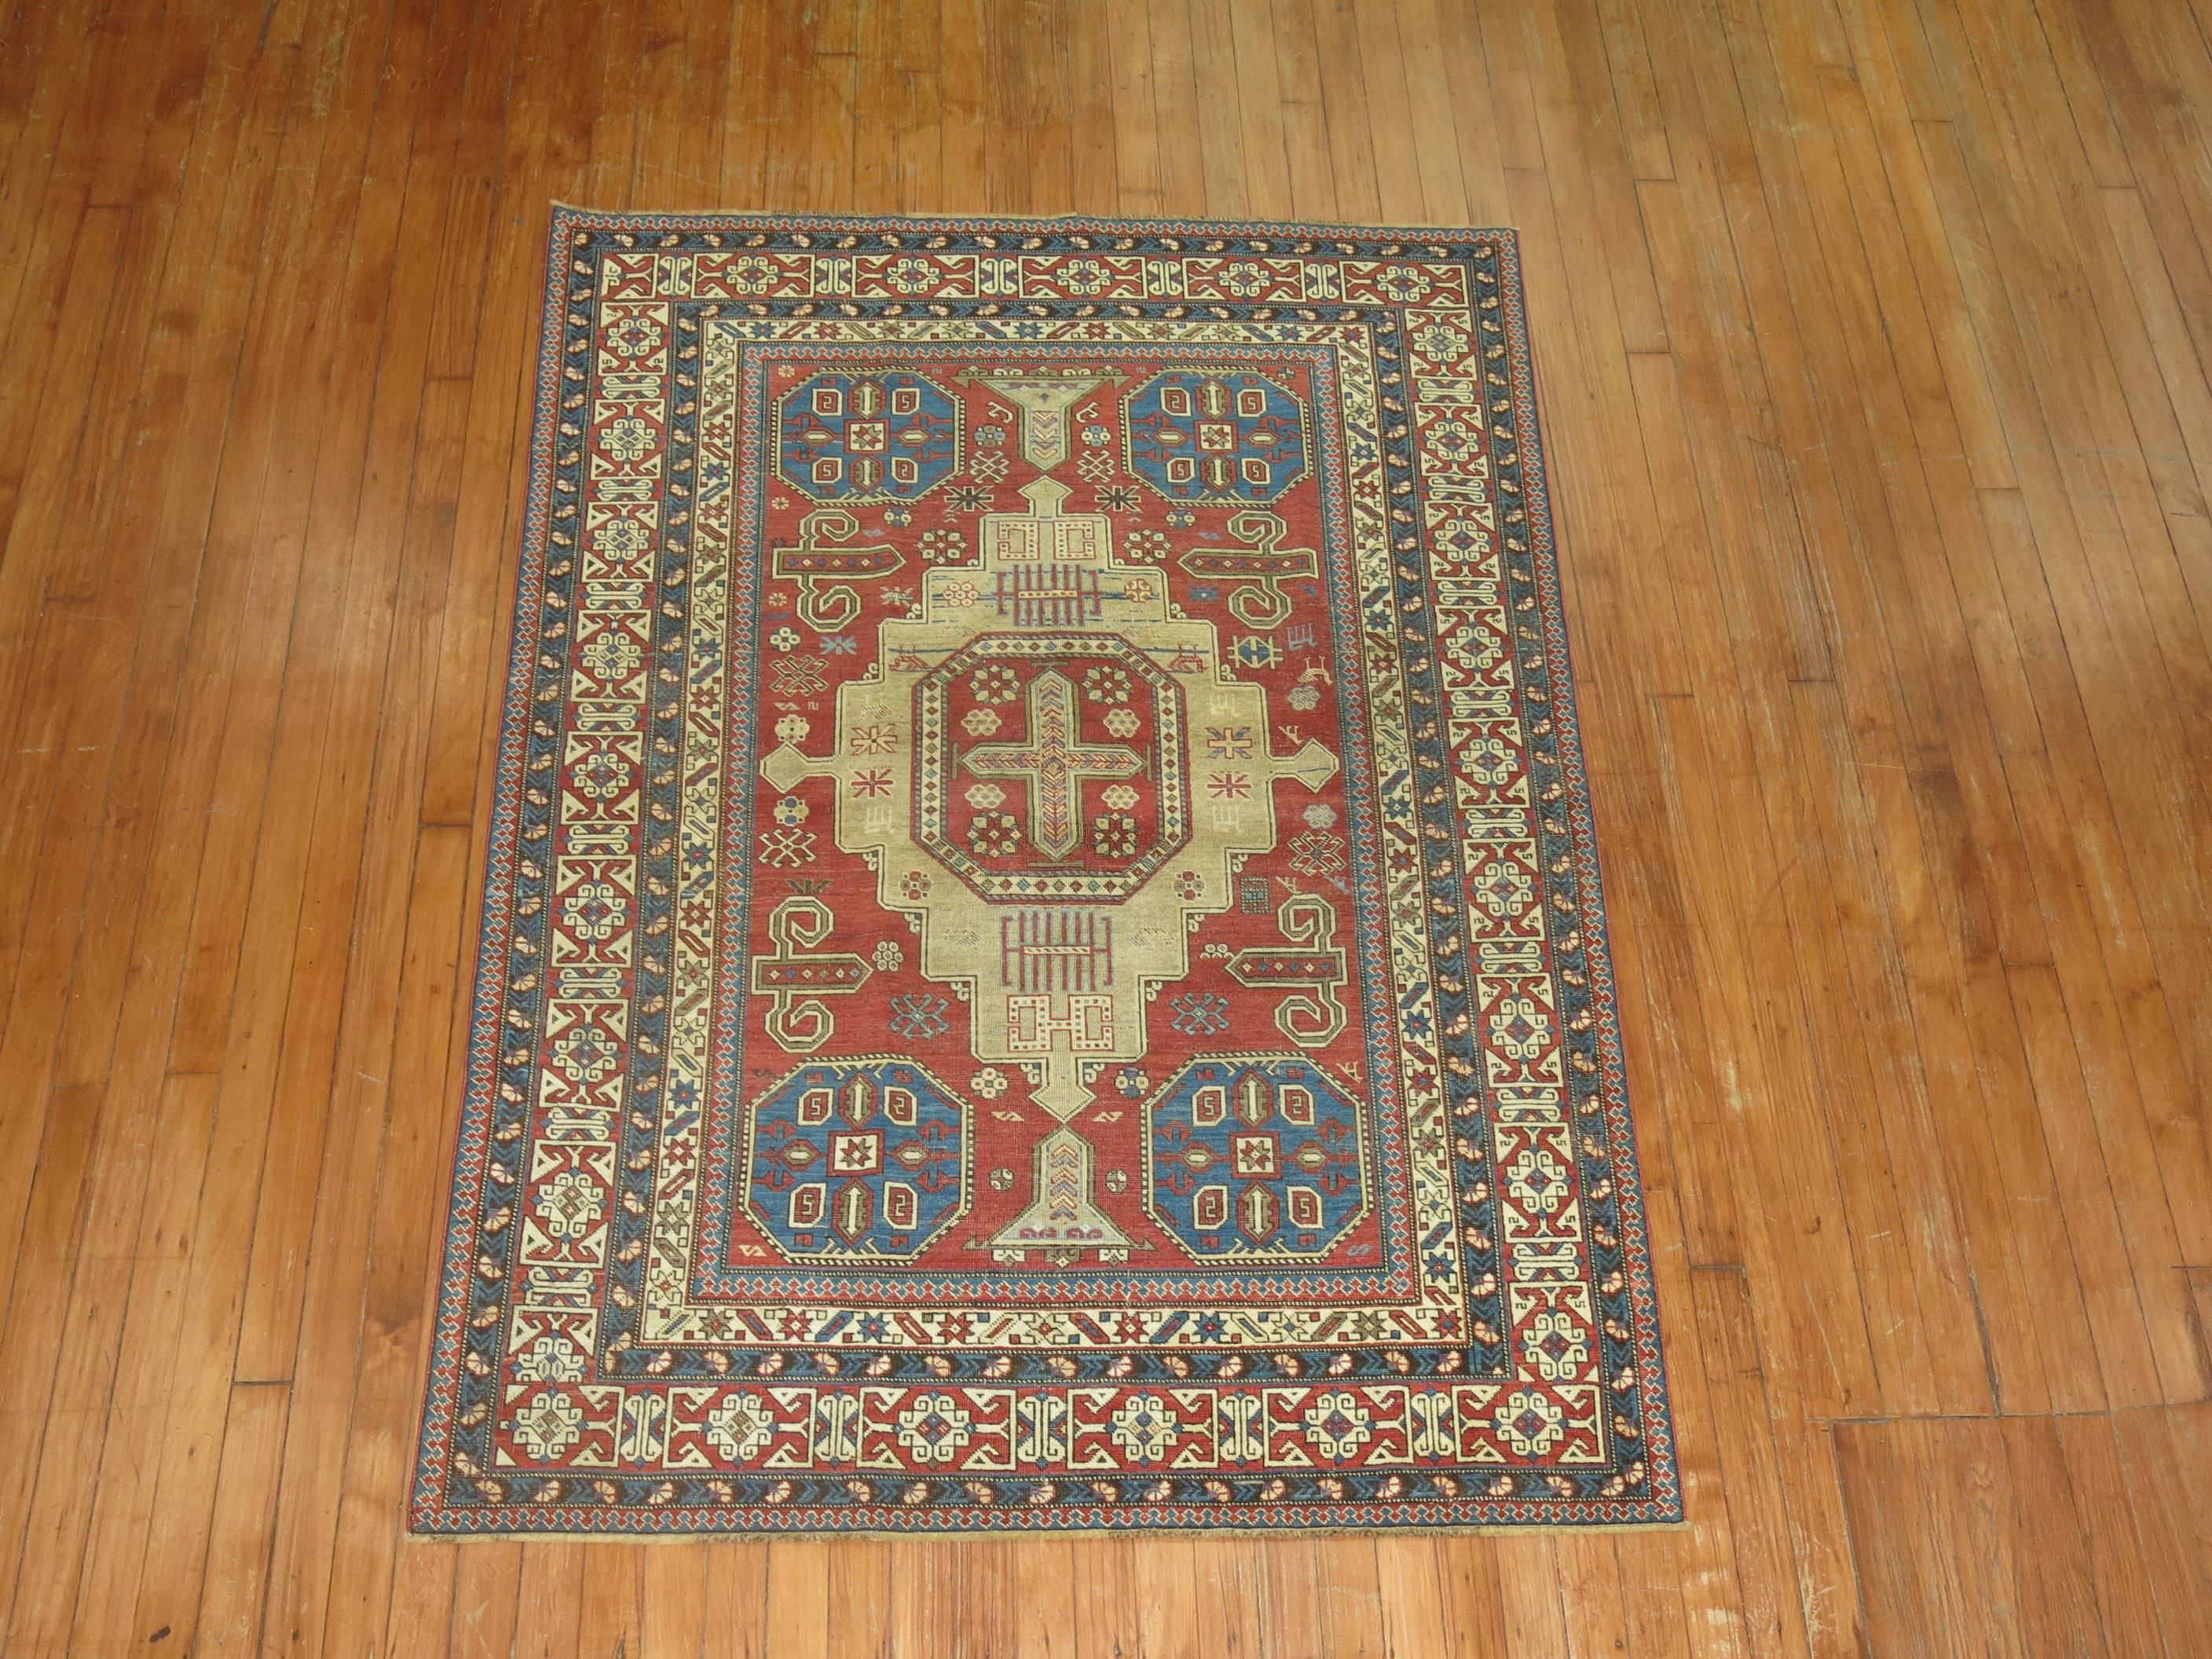 An early 20th century Antique Caucasian Shirvan rug with a camel color medallion on a soft brick red field and multi band border.

Antique Shirvan Caucasian rugs of this caliber ceased to be produced around the turn of the 20th century. With the